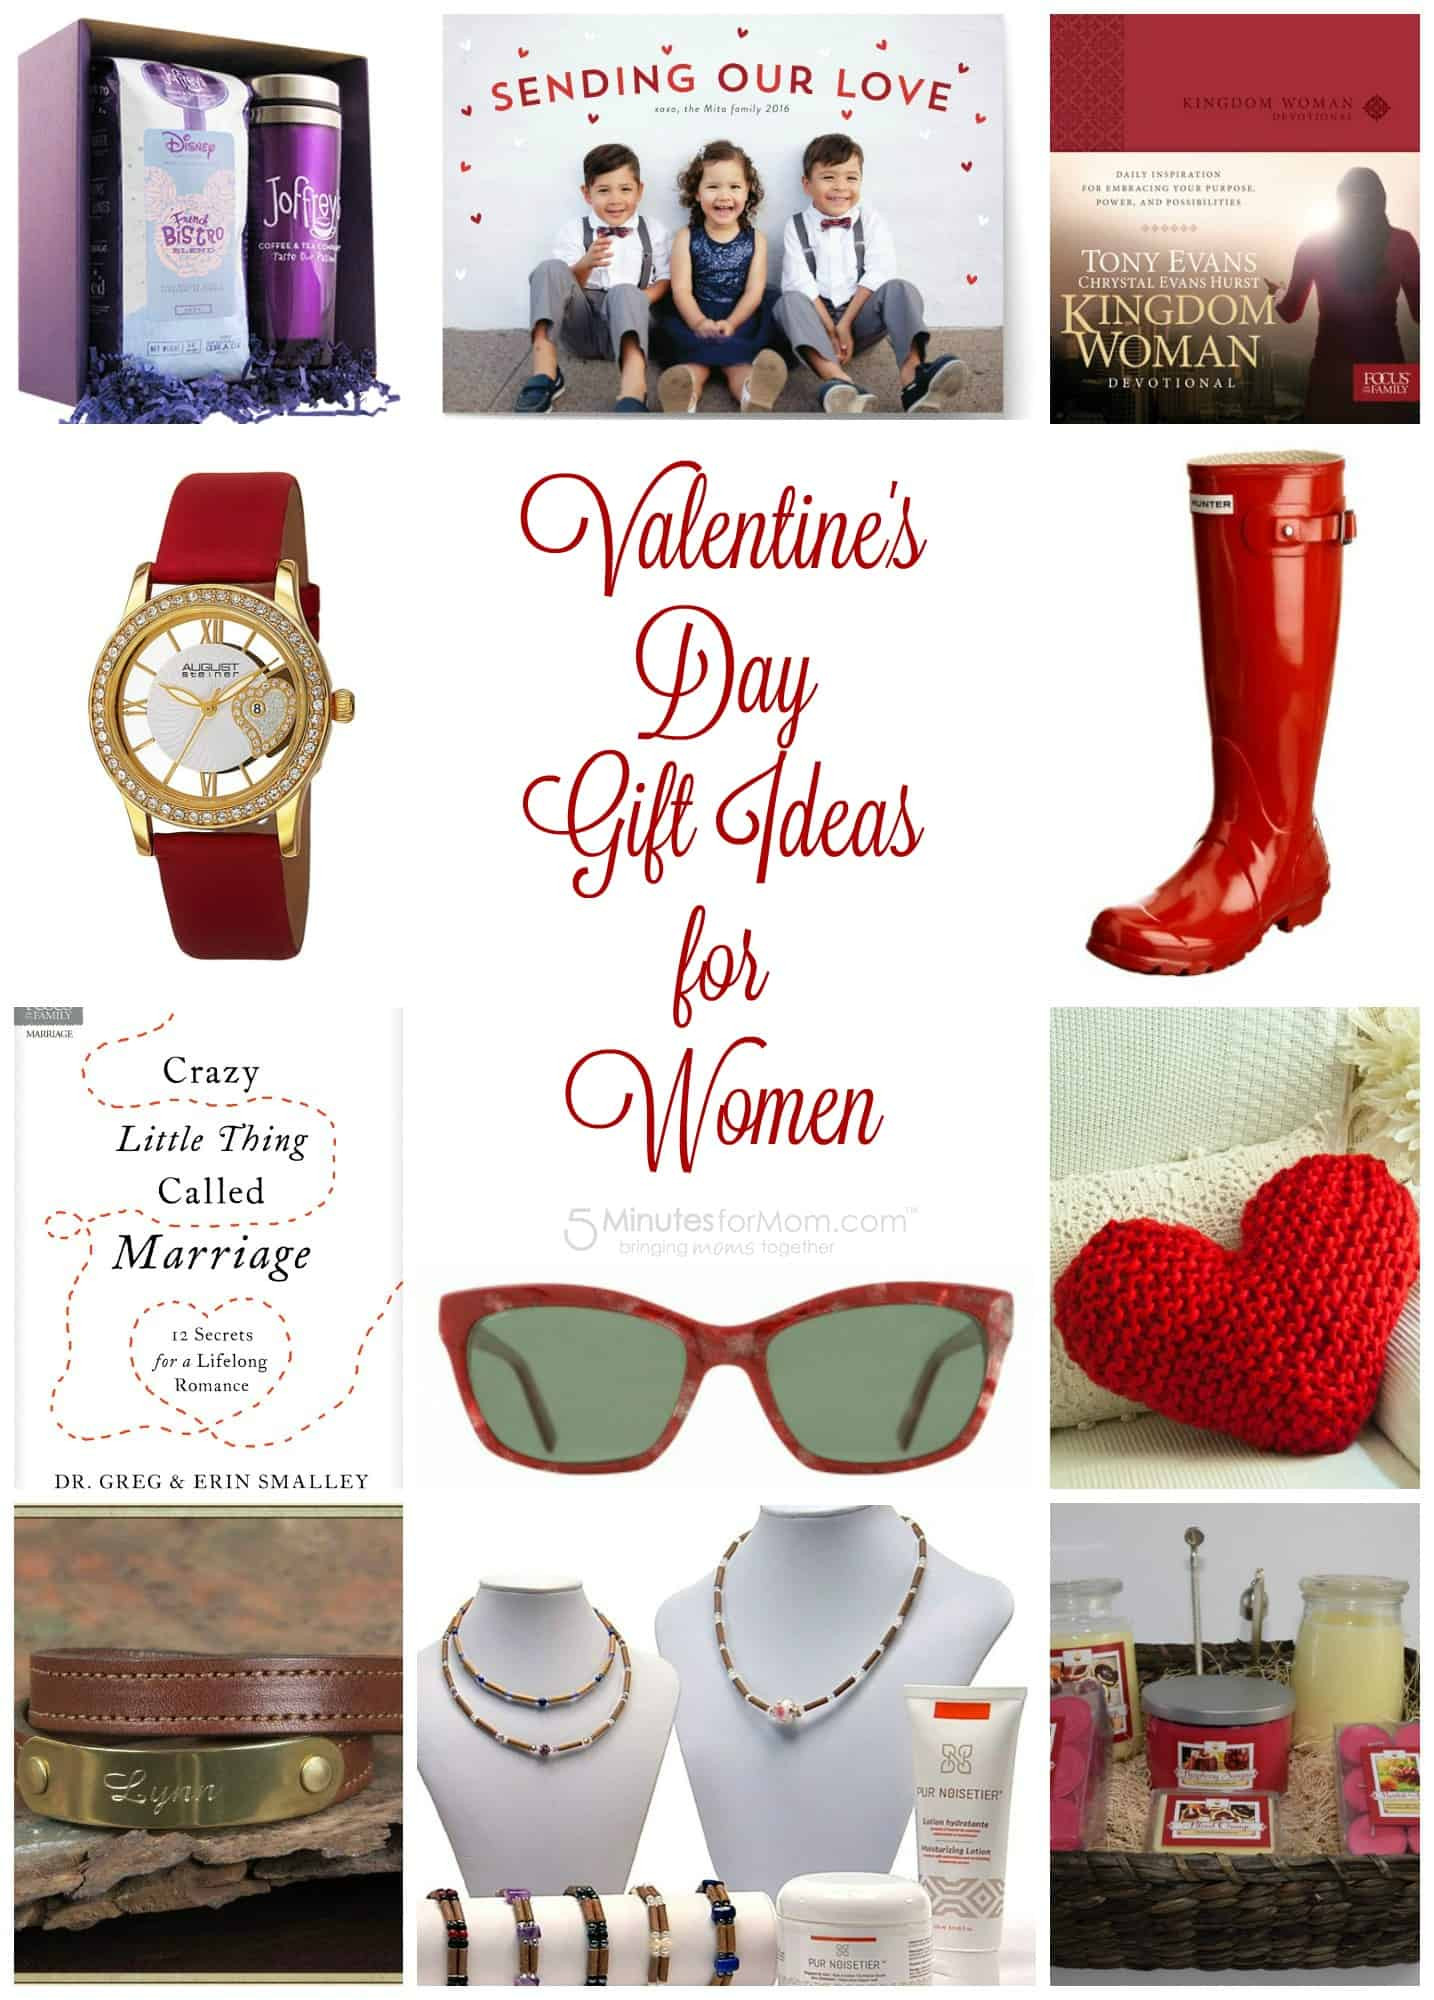 Valentine Gift Ideas for Women Awesome Valentine S Day Gift Guide for Women Plus $100 Amazon